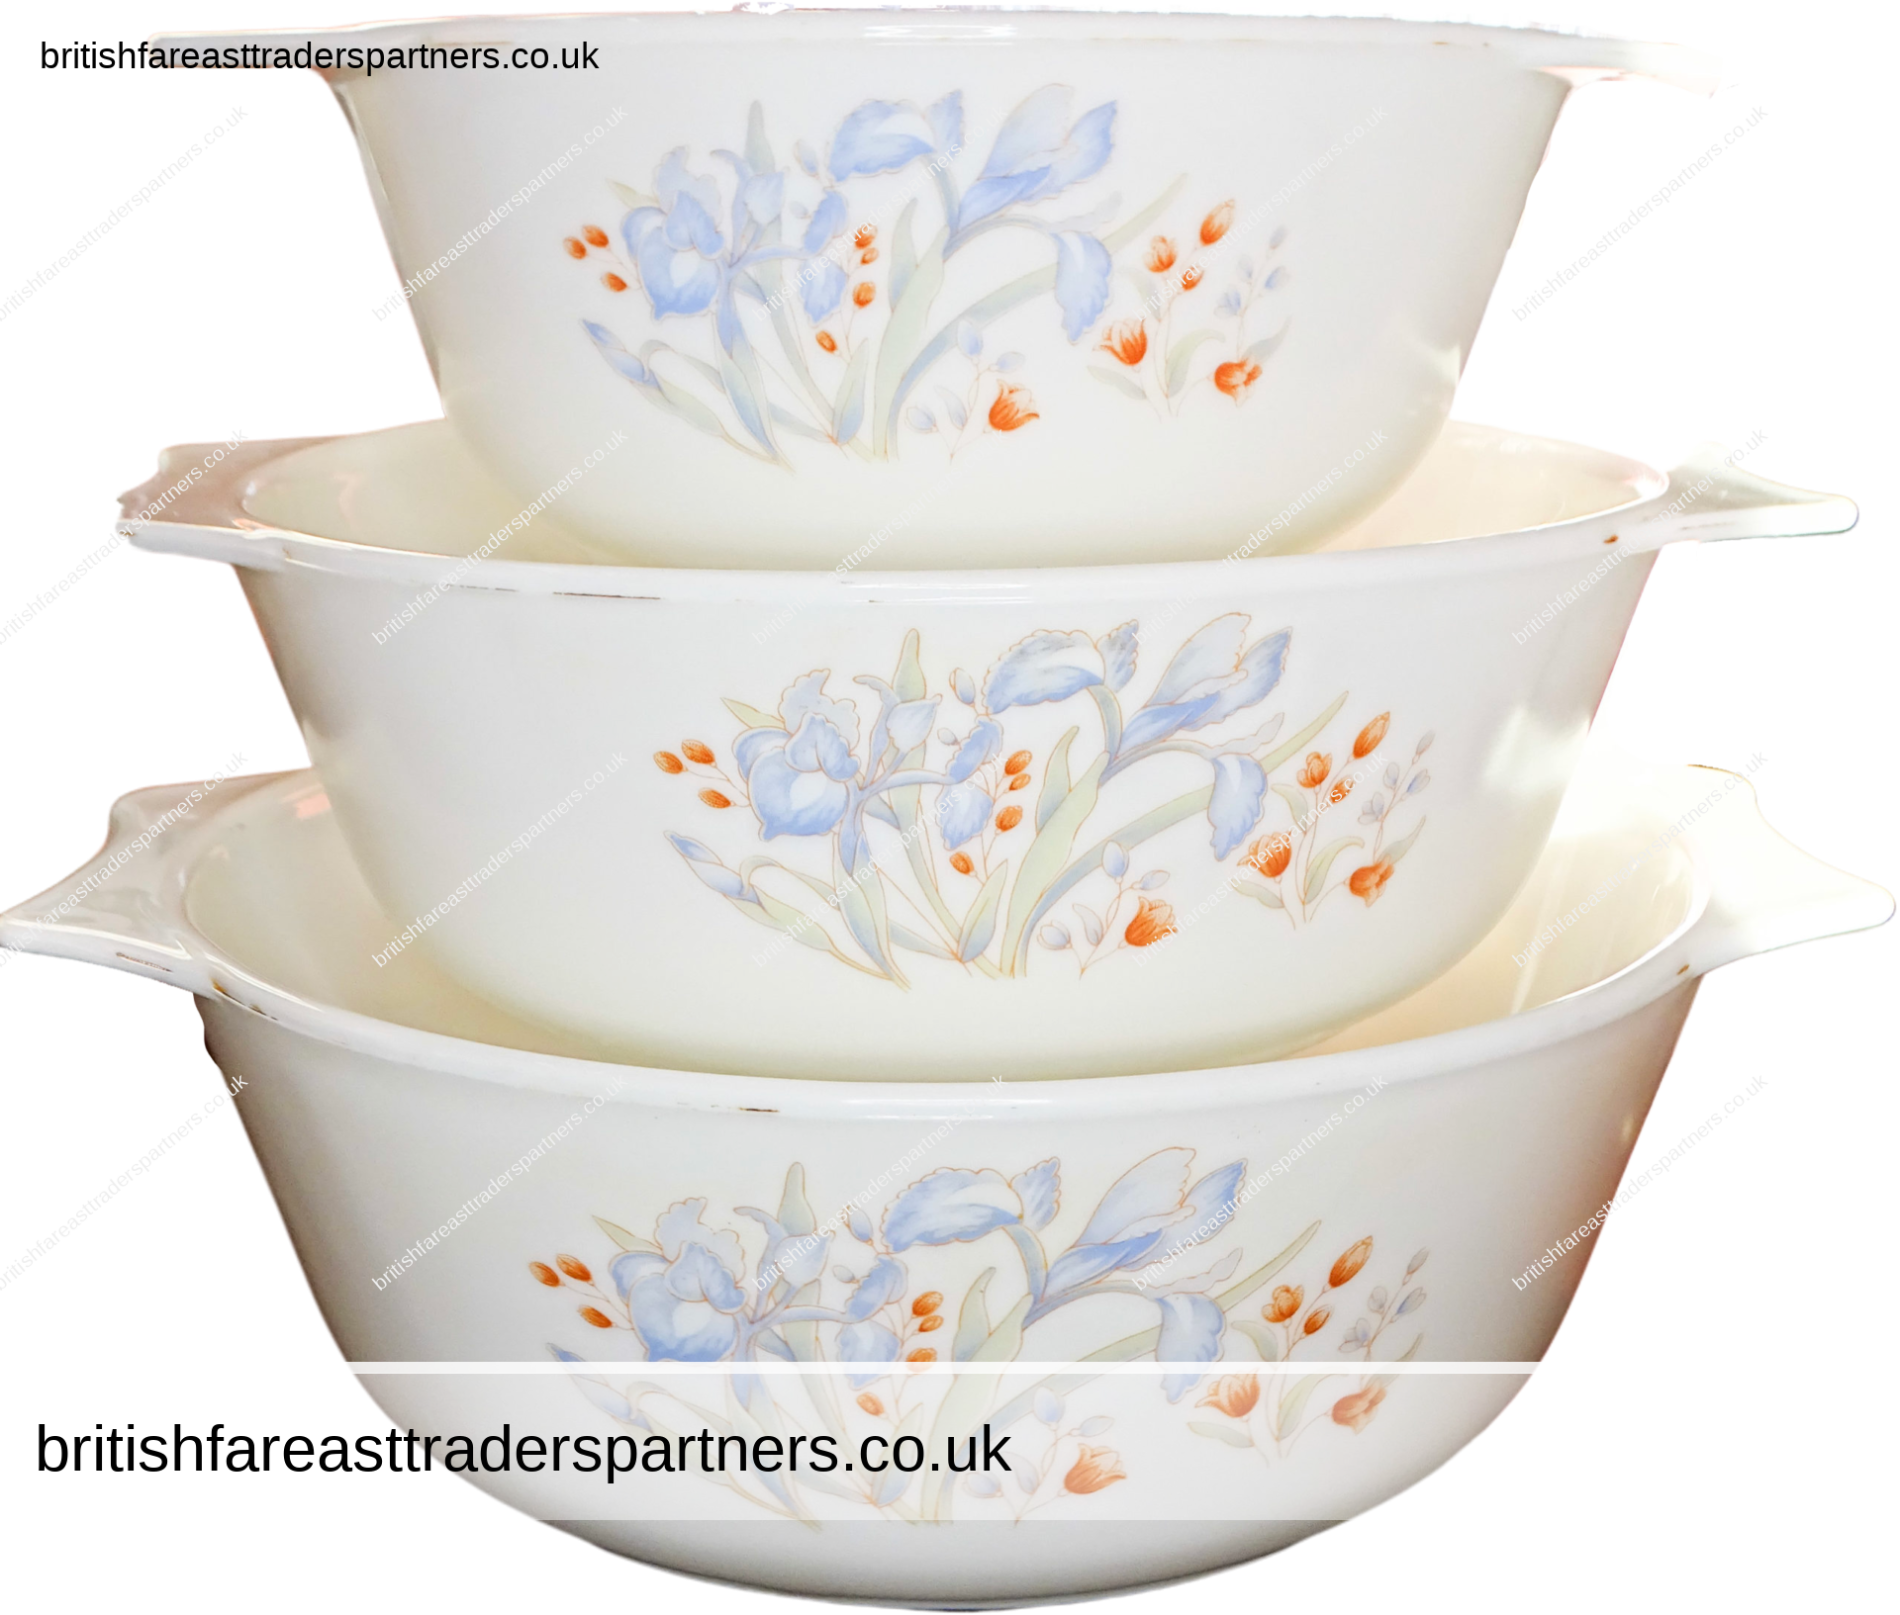 VINTAGE PYREX Set / LOT of 3 PRETTY Milkglass  Oven Casserole Dishes Blue Irises & Florals Made in England